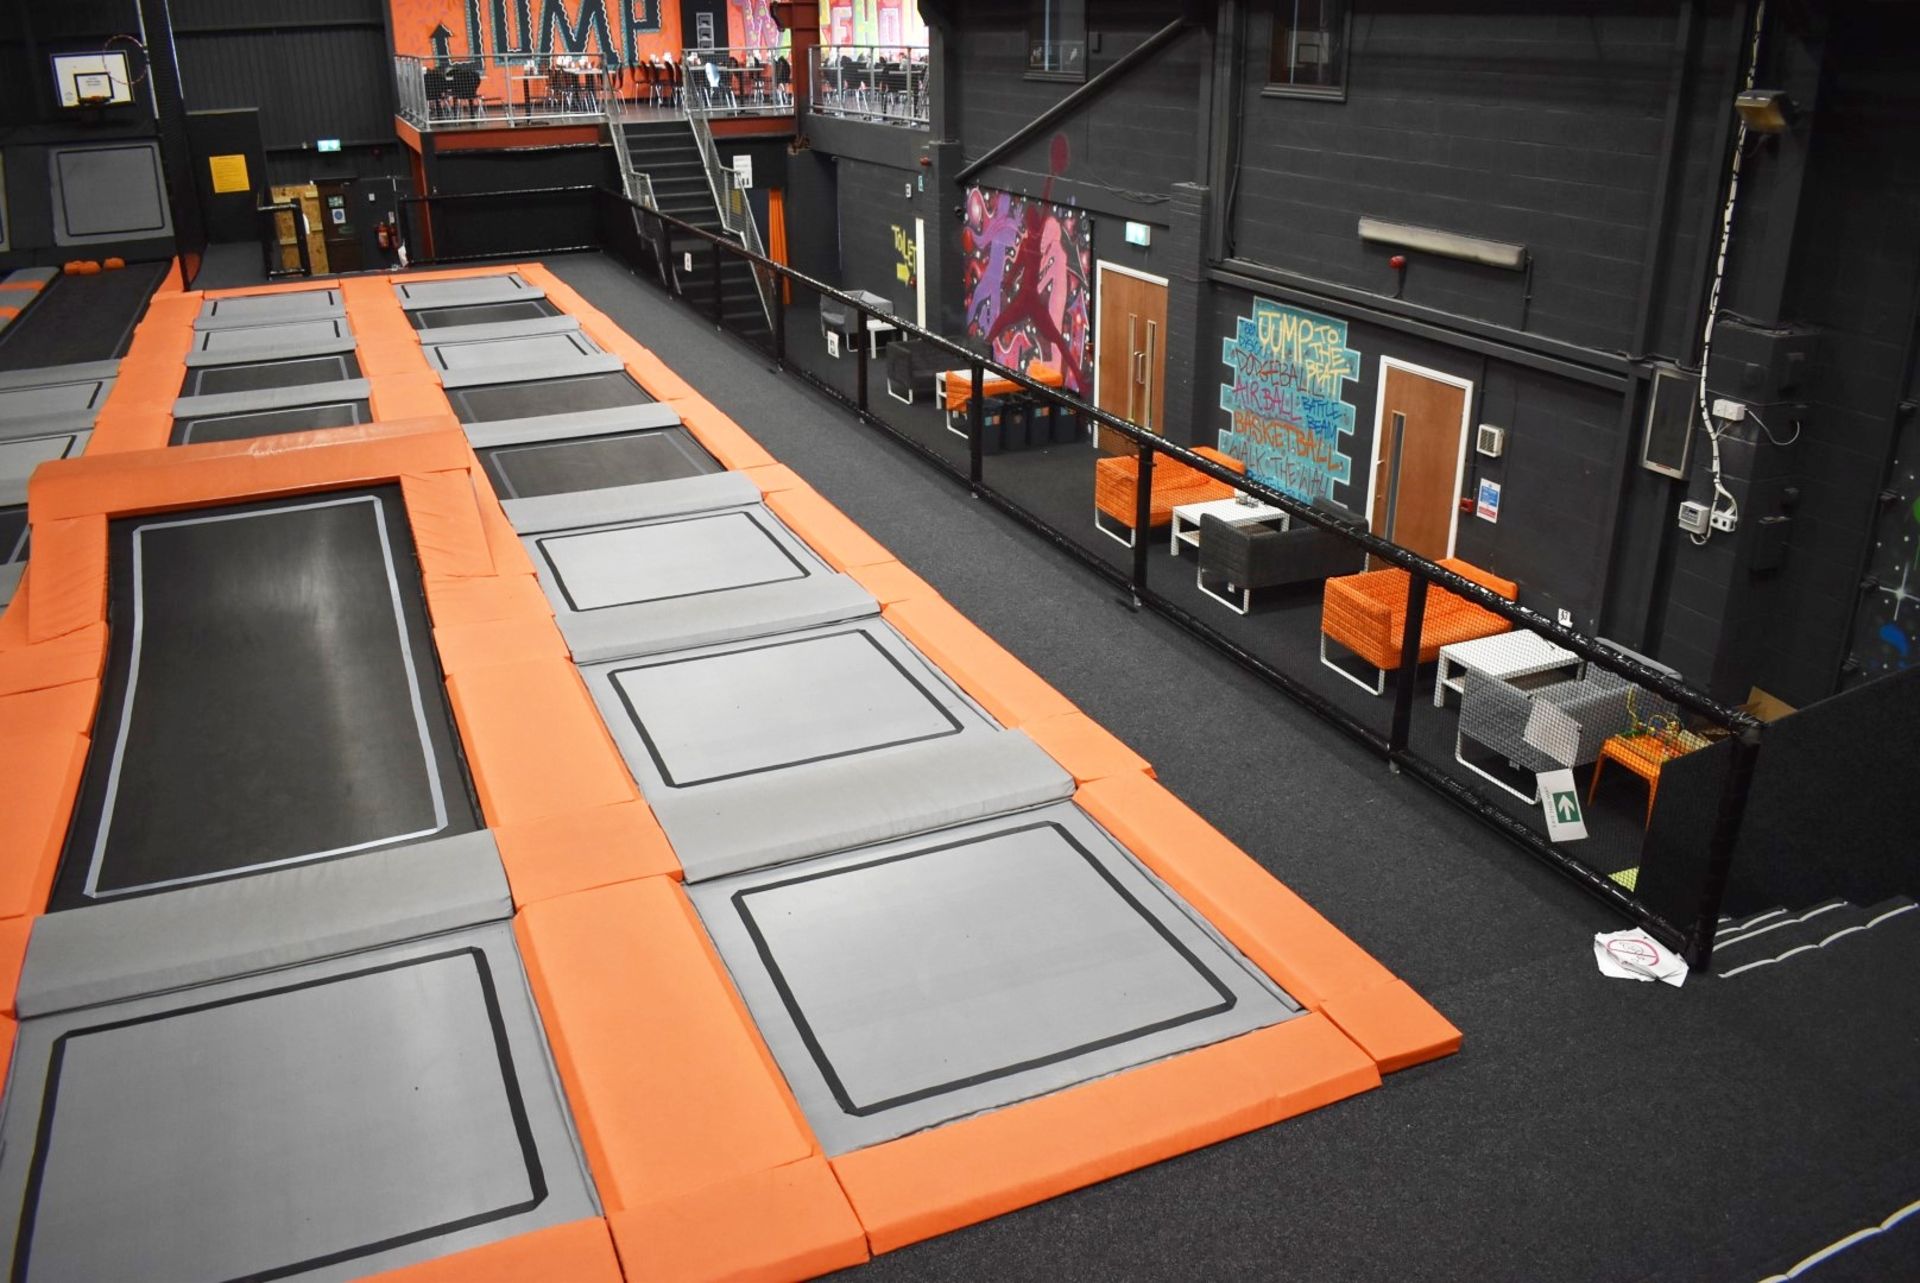 1 x Large Trampoline Park - Disassembled - Includes Dodgeball Arena And Jump Tower - CL766  - - Image 21 of 99